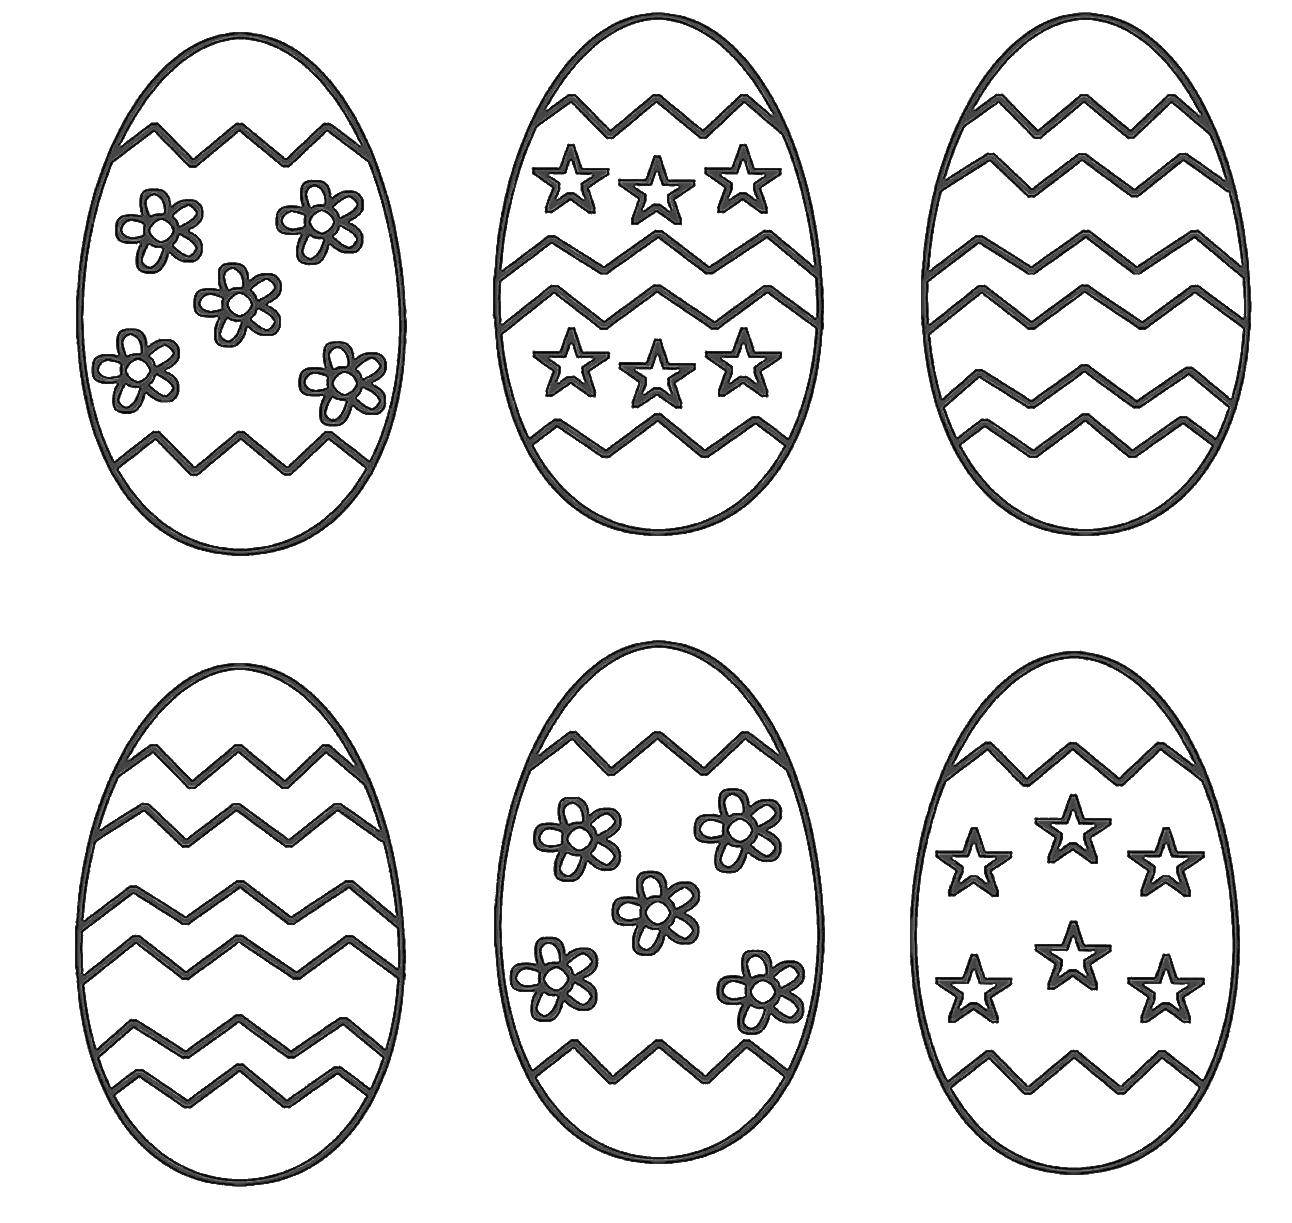 Coloring Beautiful patterns on the eggs. Category Patterns for coloring eggs. Tags:  Easter, eggs, patterns.